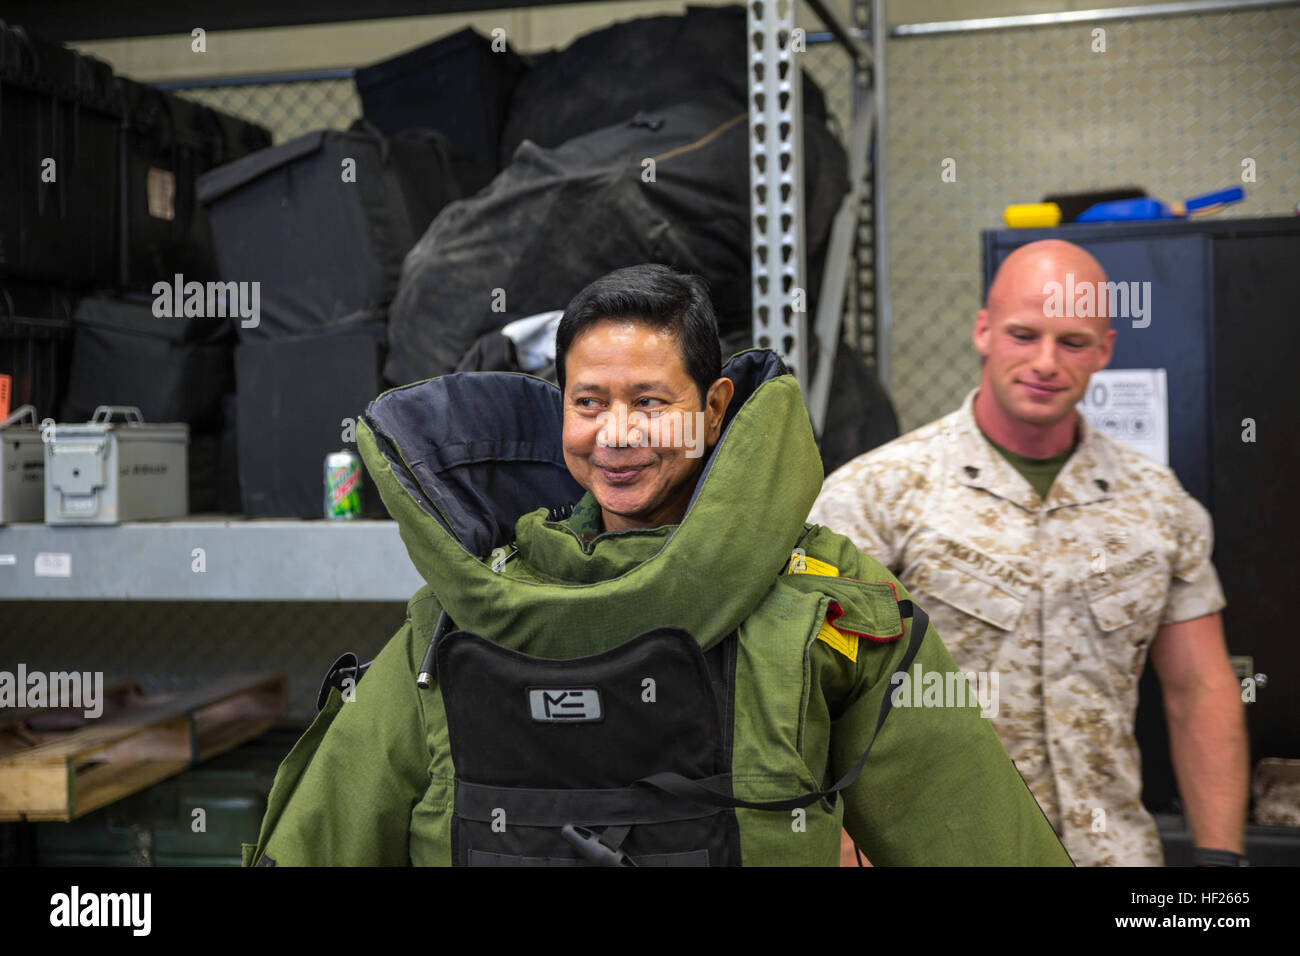 Royal Thai Armed Forces Lt. Gen. Krisda Norapoompipat wears an advanced bomb suit after receiving assistance from U.S. Marine Sgt. Garrett S. Mountain May 19 at Camp Hansen. Norapoompipat visited Camp Hansen to discuss explosive ordnance disposal tactics, techniques and procedures employed by the U.S. Marine Corps, as well as both countries' capabilities for unexploded ordnance disposal training. The Kingdom of Thailand shares a long-standing alliance with the U.S., and both countries frequently work together in humanitarian aid efforts, preparation and training exercises. Norapoompipat is the Stock Photo